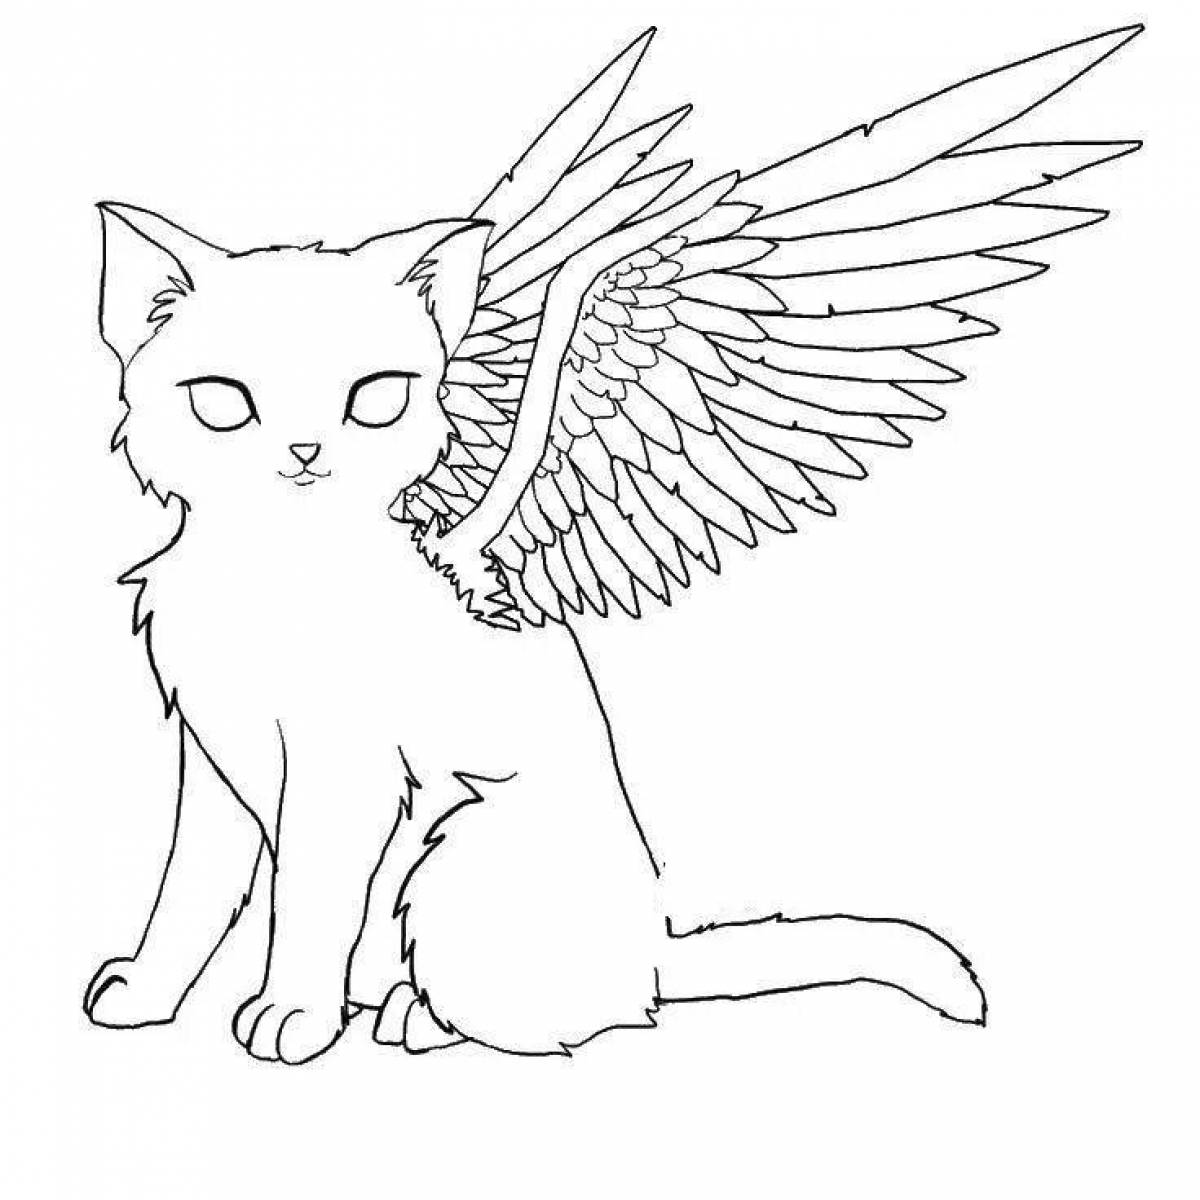 Impressive coloring cat with wings